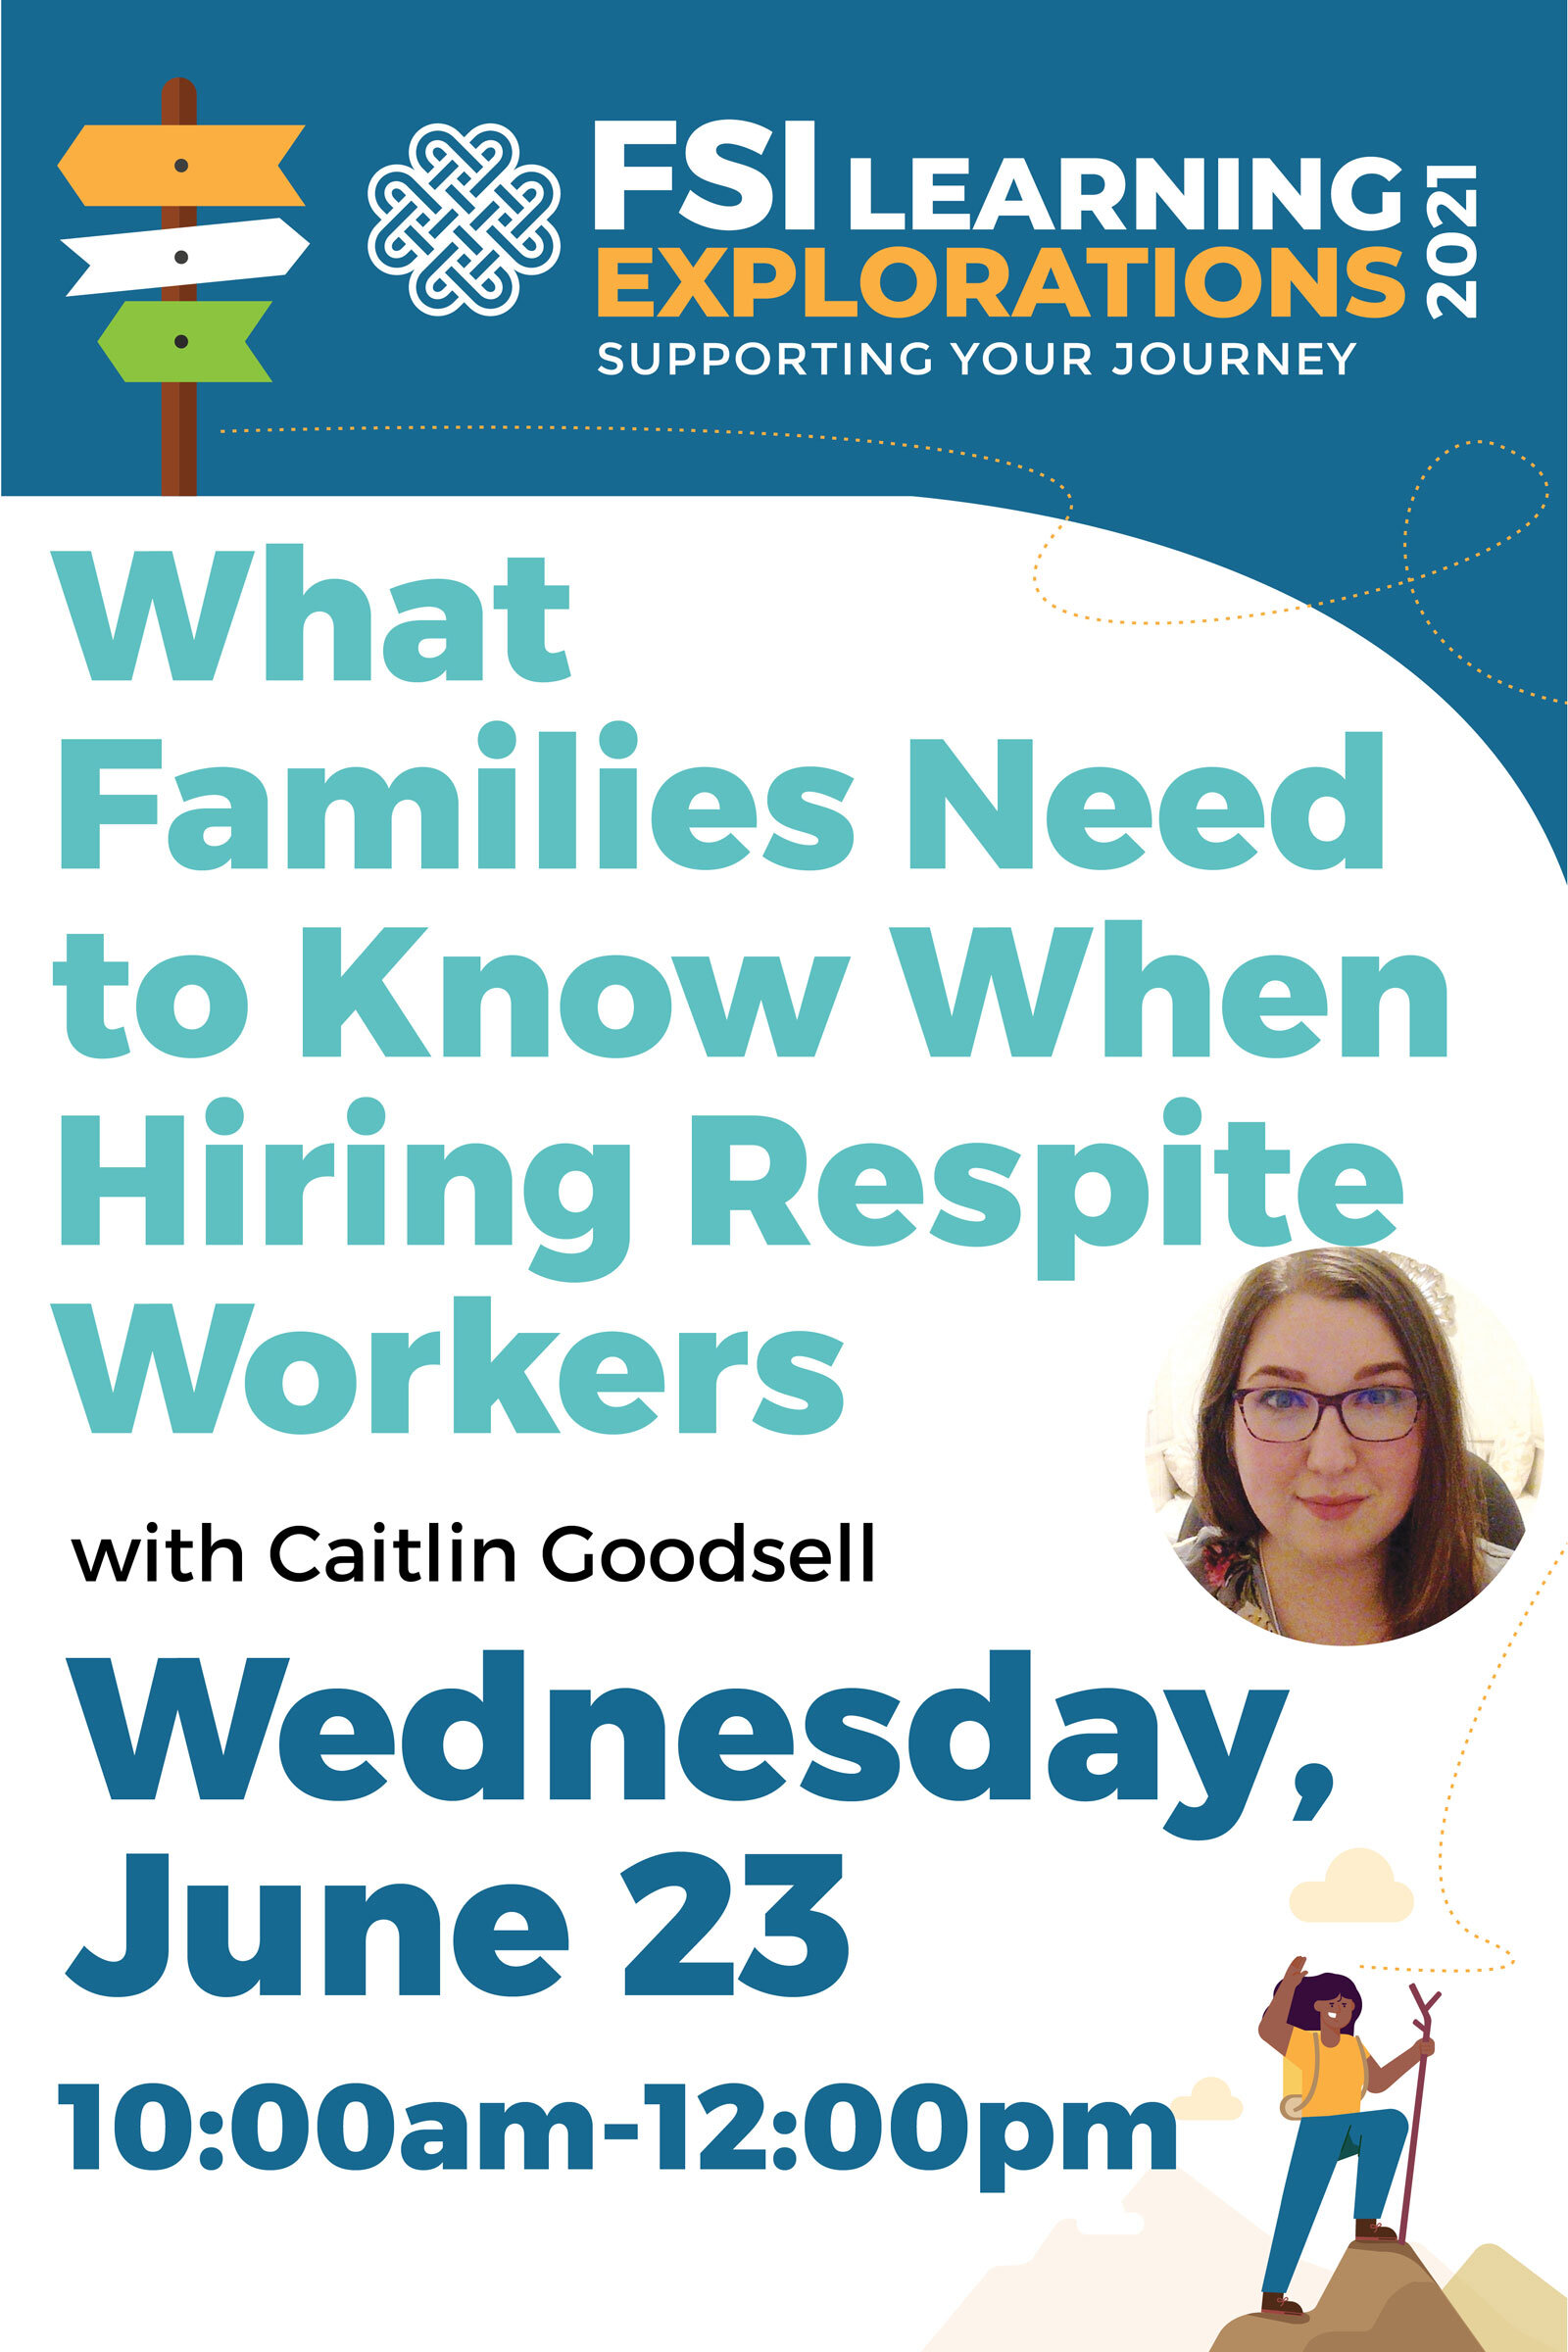 FSI Learning Explorations - What Families Need to Know When Hiring Respite Workers